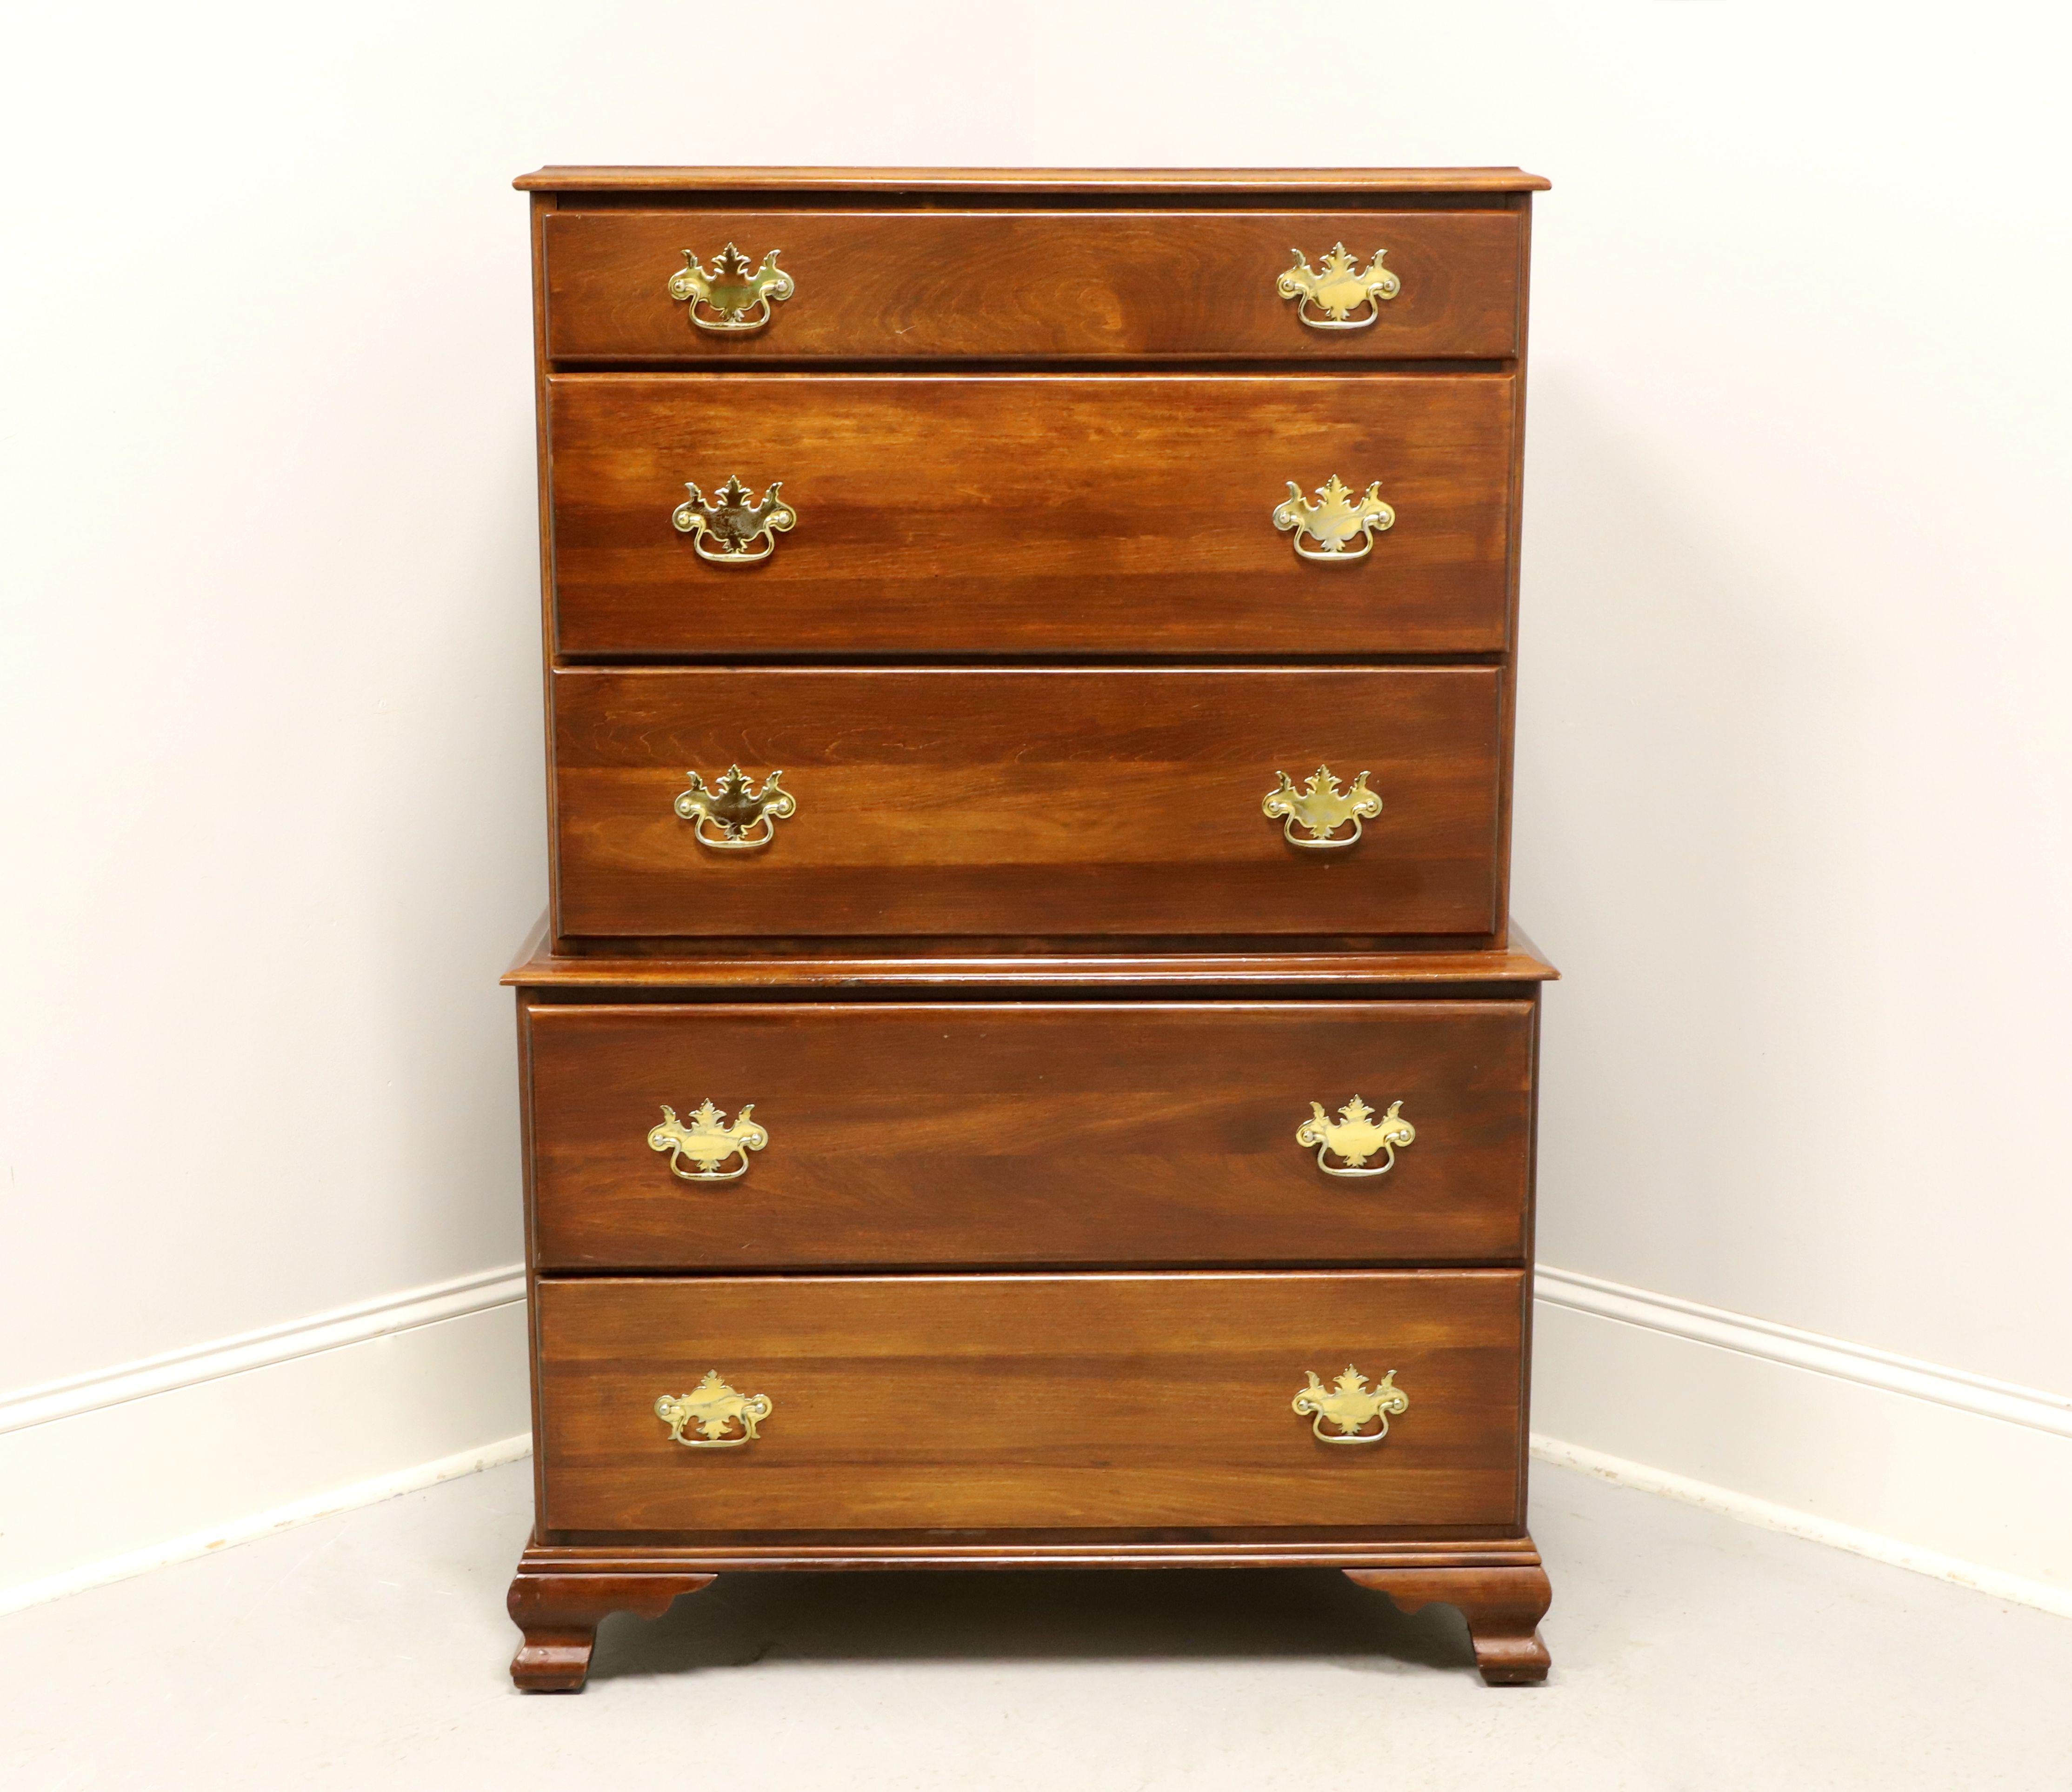 An antique Chippendale style chest on chest of drawers, unbranded. Cherry with brass hardware, ogee edge to the top, ogee edge dividing chests, and ogee bracket feet. Features five various size drawers of dovetail construction, with top two drawers